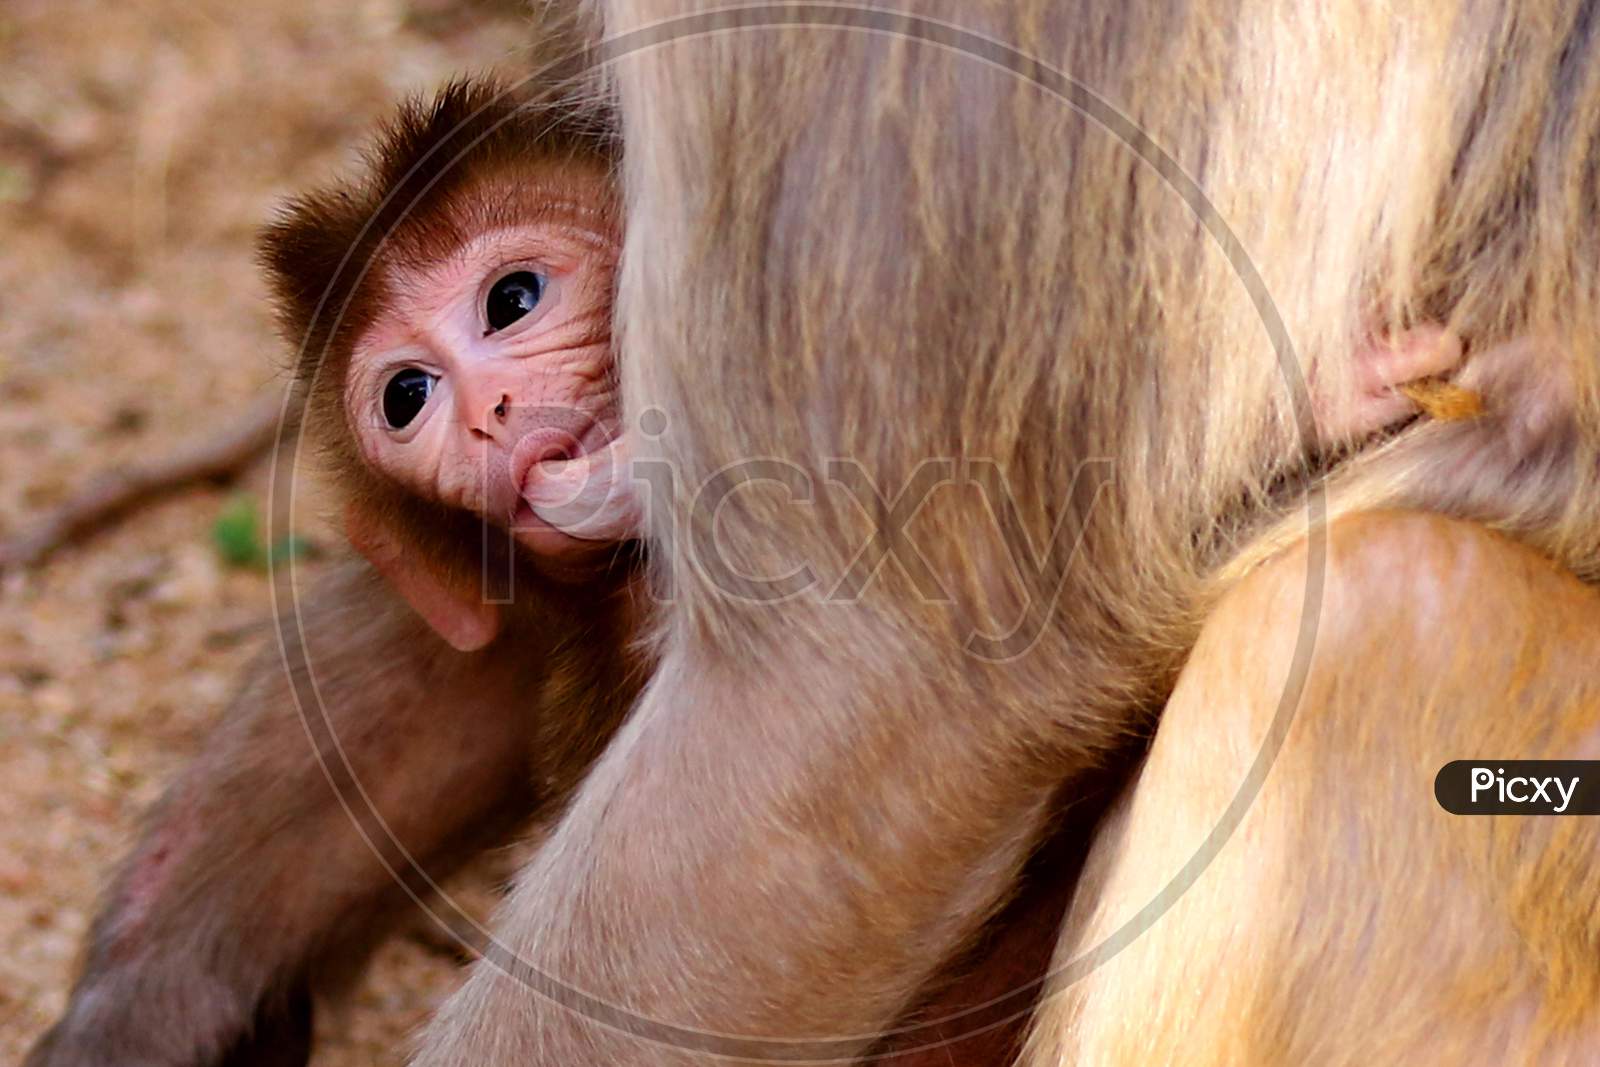 A female macaque feeds her baby on the eve of Mother's Day in Pushkar, Rajasthan, India on 09 May 2020.